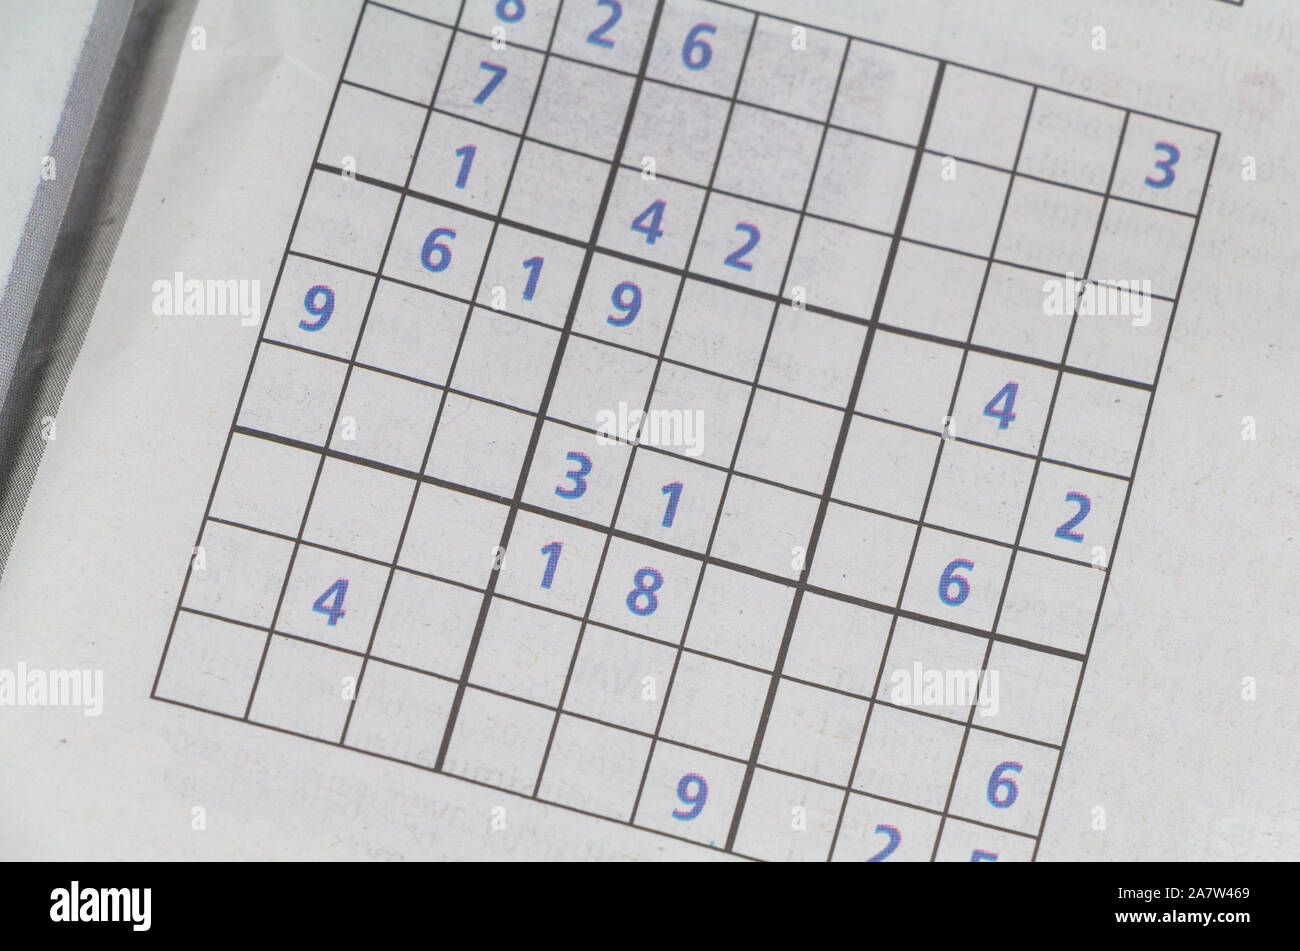 Sudoku game in a newspaper to train your brain Stock Photo